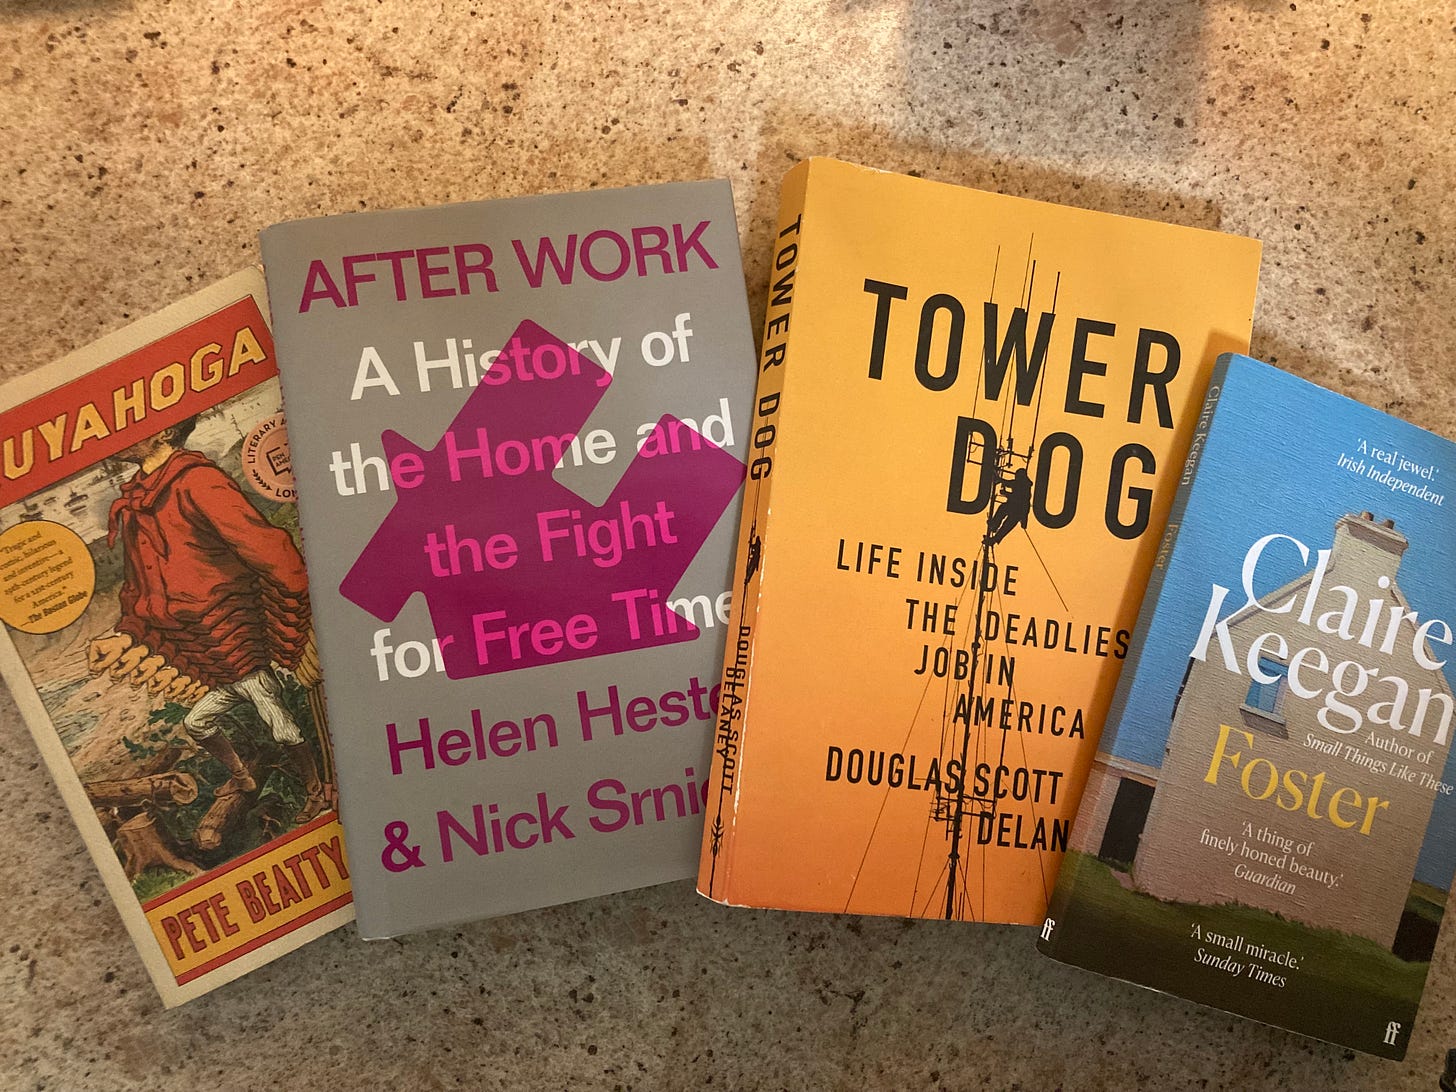 Photograph of copies of four books: Cuyahoga by Pete Beatty, After Work: A History of the Home and the Fight for Free Time by Helen Hester and Nick Srnicek, Tower Dog: Life Inside the Deadliest Job in America by Douglas Scott Delaney, and Foster by Claire Keegan.